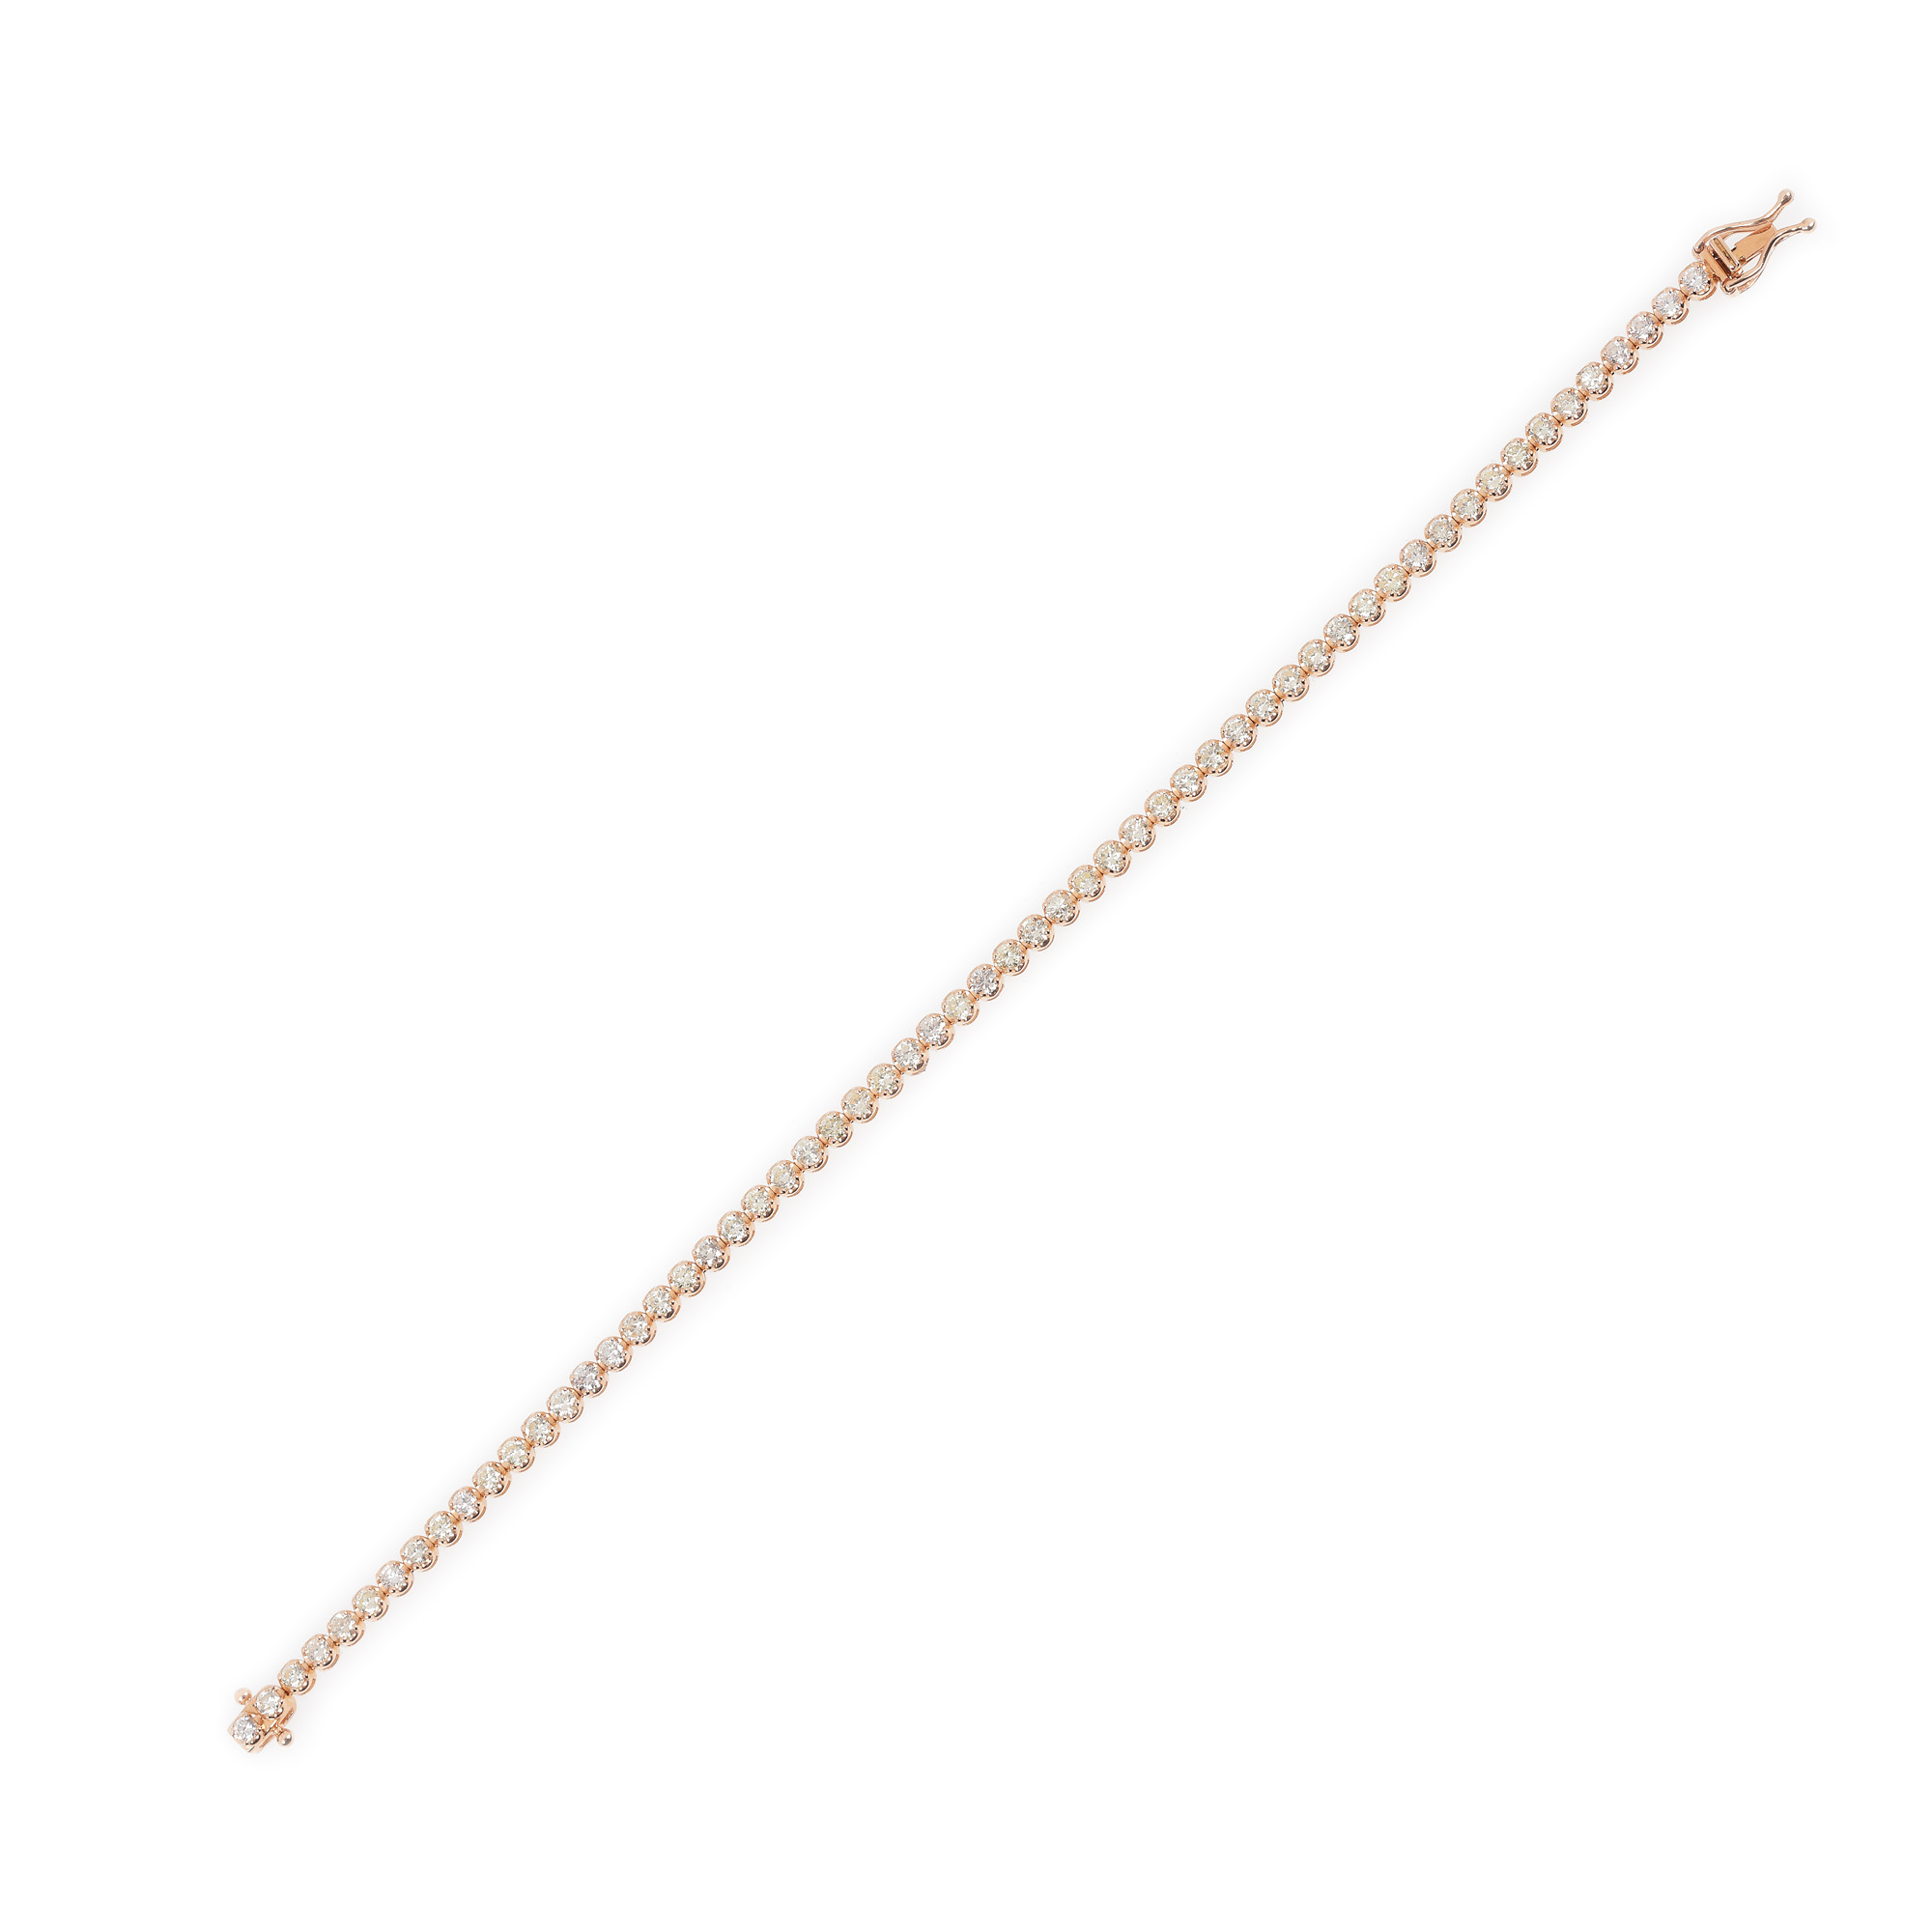 Tennis bracelet, rose gold, decorated with diamonds